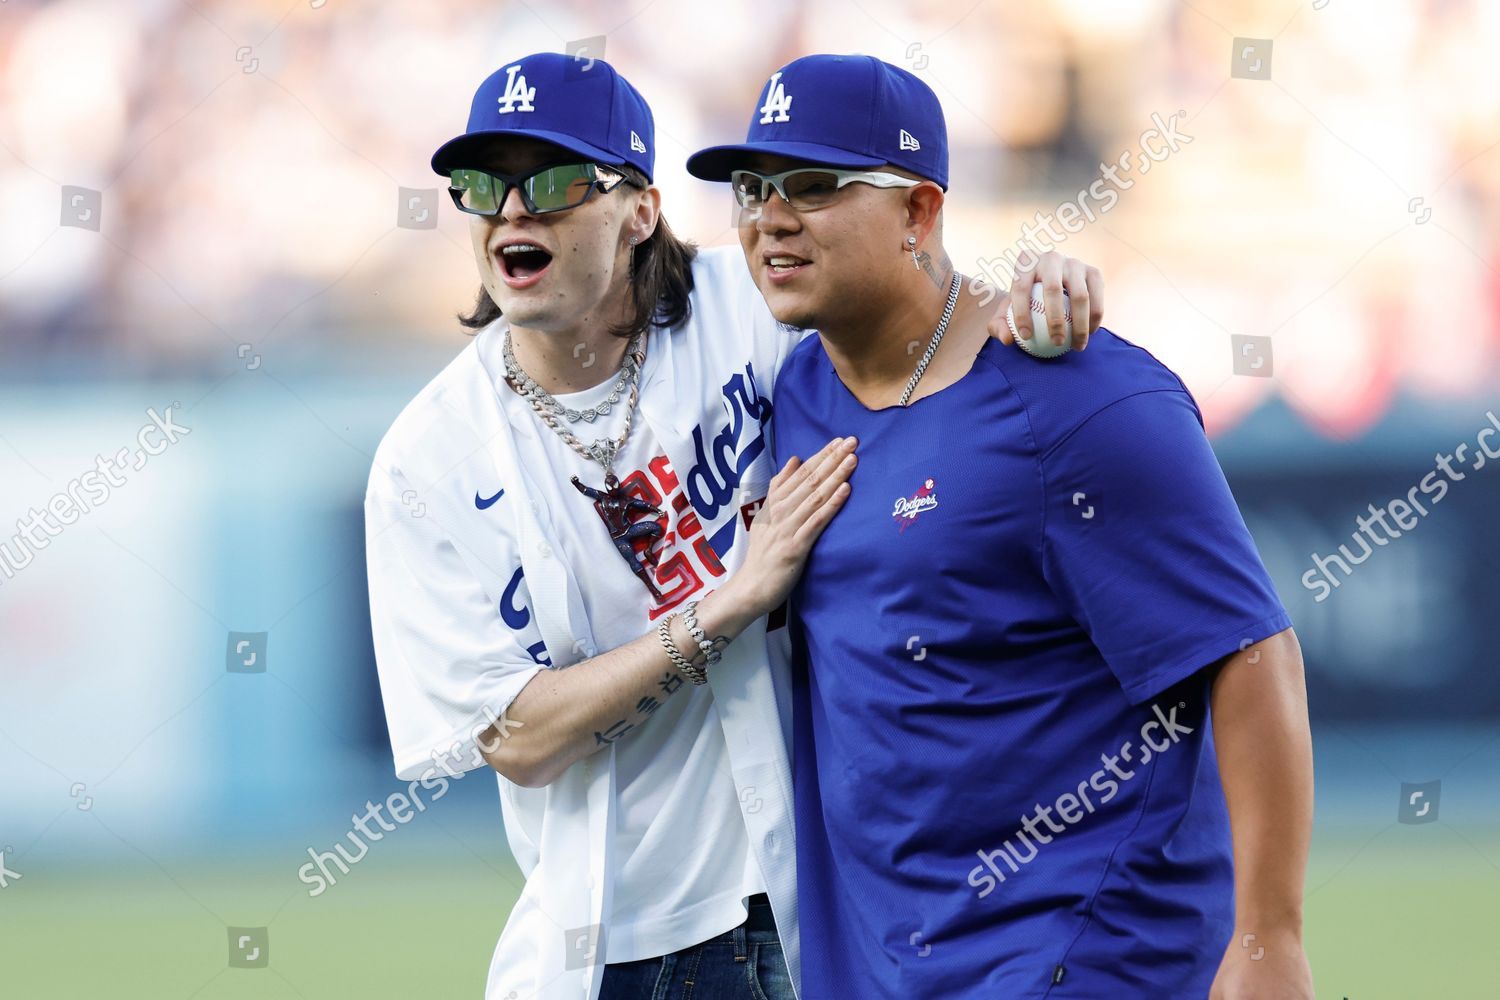 Peso Pluma throws out first pitch at Dodger Stadium